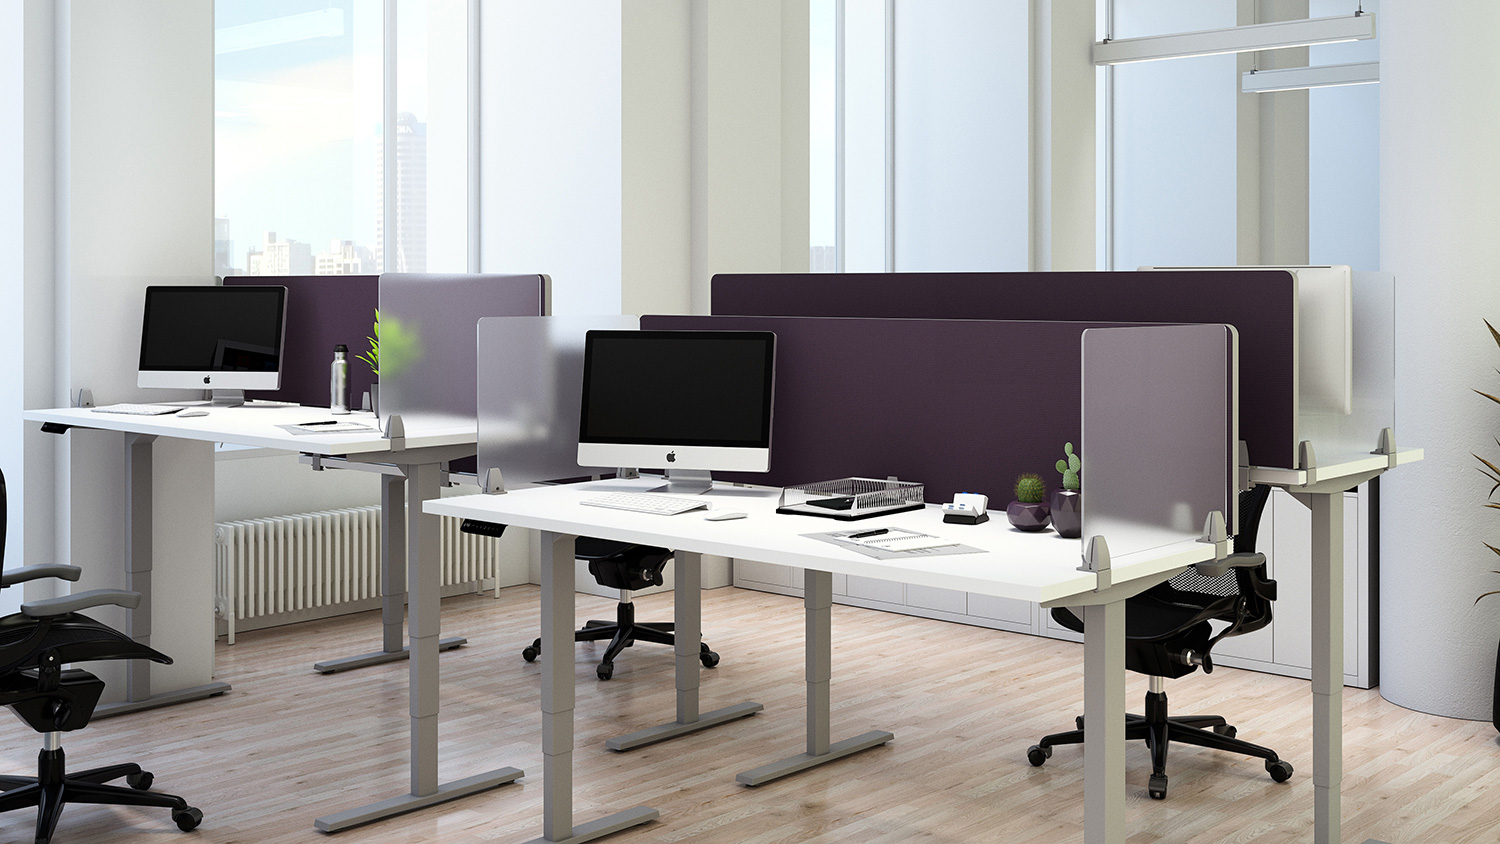 Desk Mounted Privacy Panel Dividers